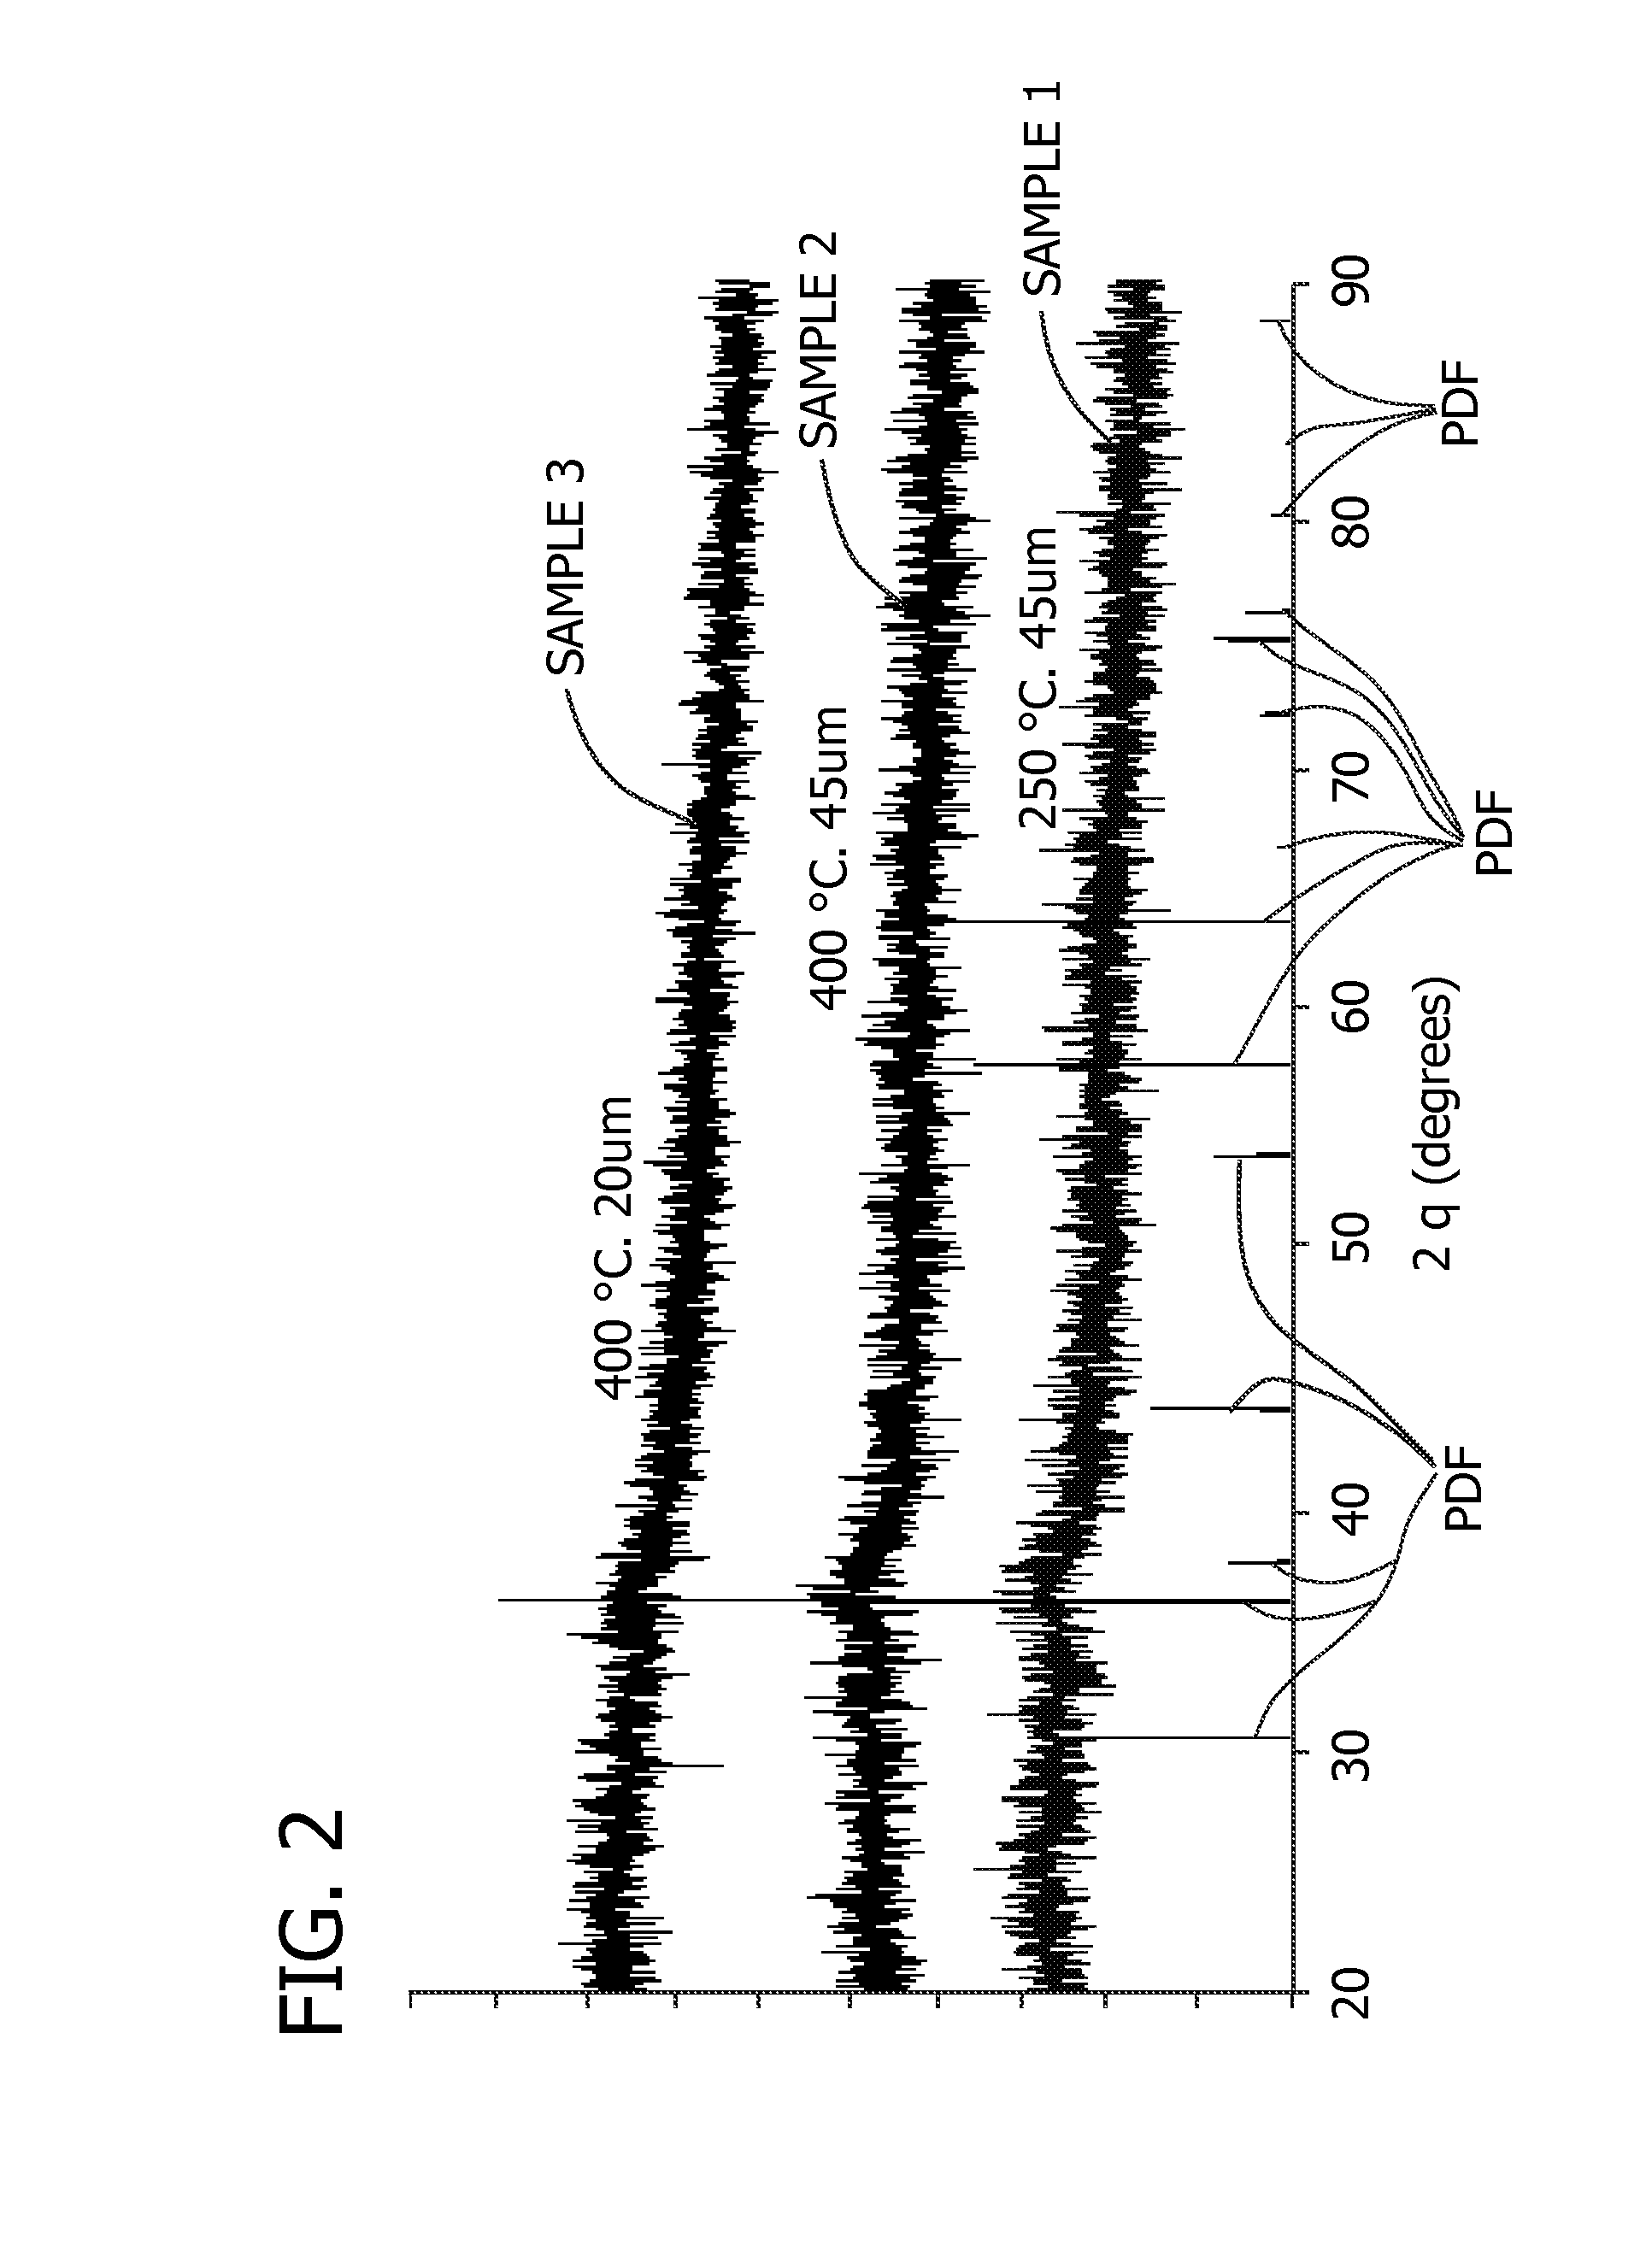 Non-aqueous cell having amorphous or semi-crystalline copper manganese oxide cathode material